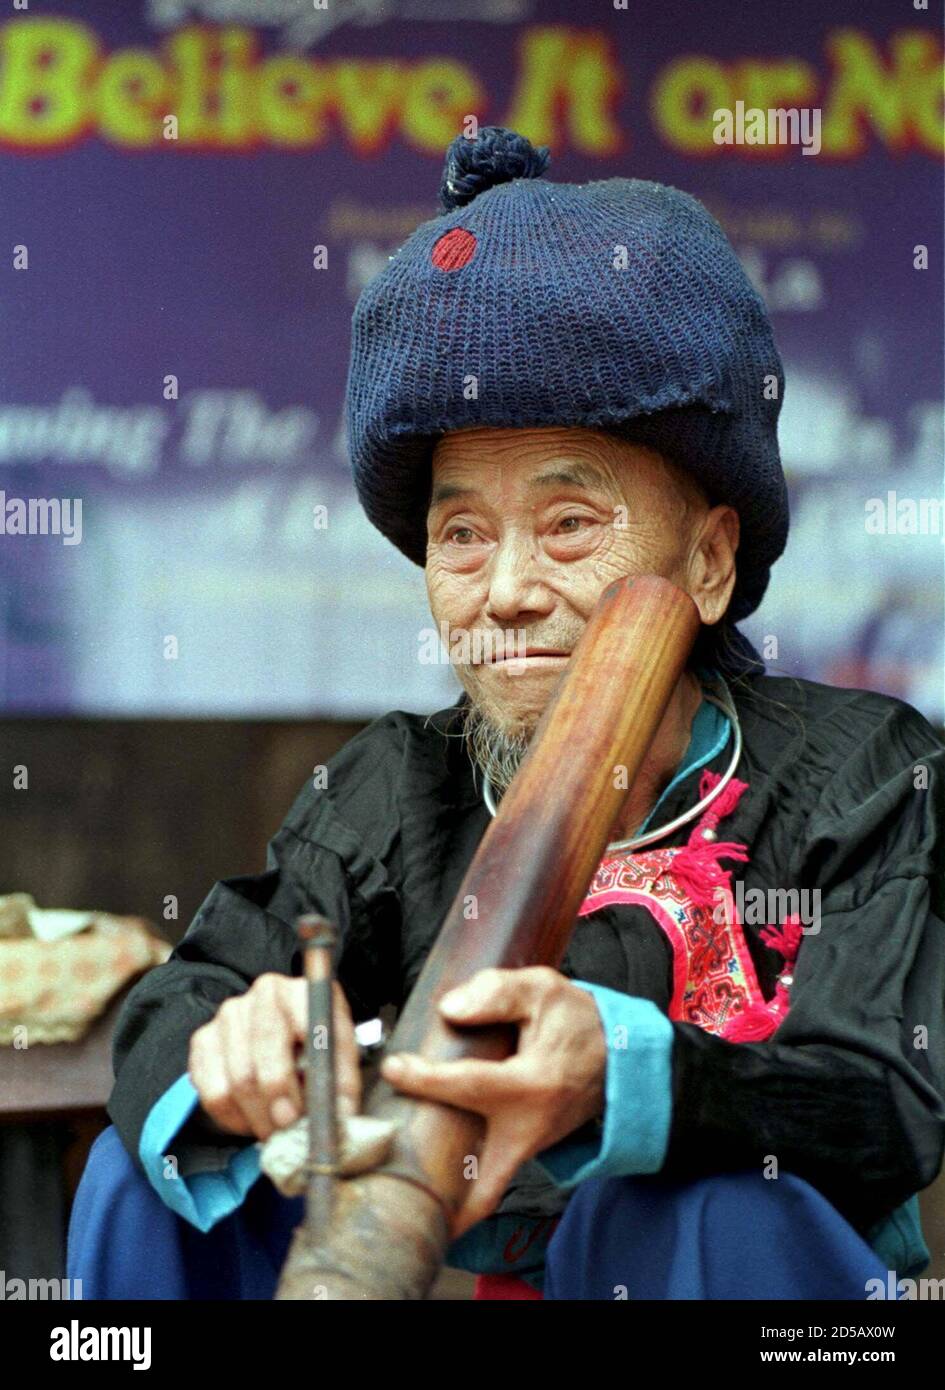 Lu Seng La, a 77-year-old Hmong hilltribe man, wears a hat to protect his  locks tidily wrapped as he enjoys a pipe of opium at home in his hut in  Chiang Mai